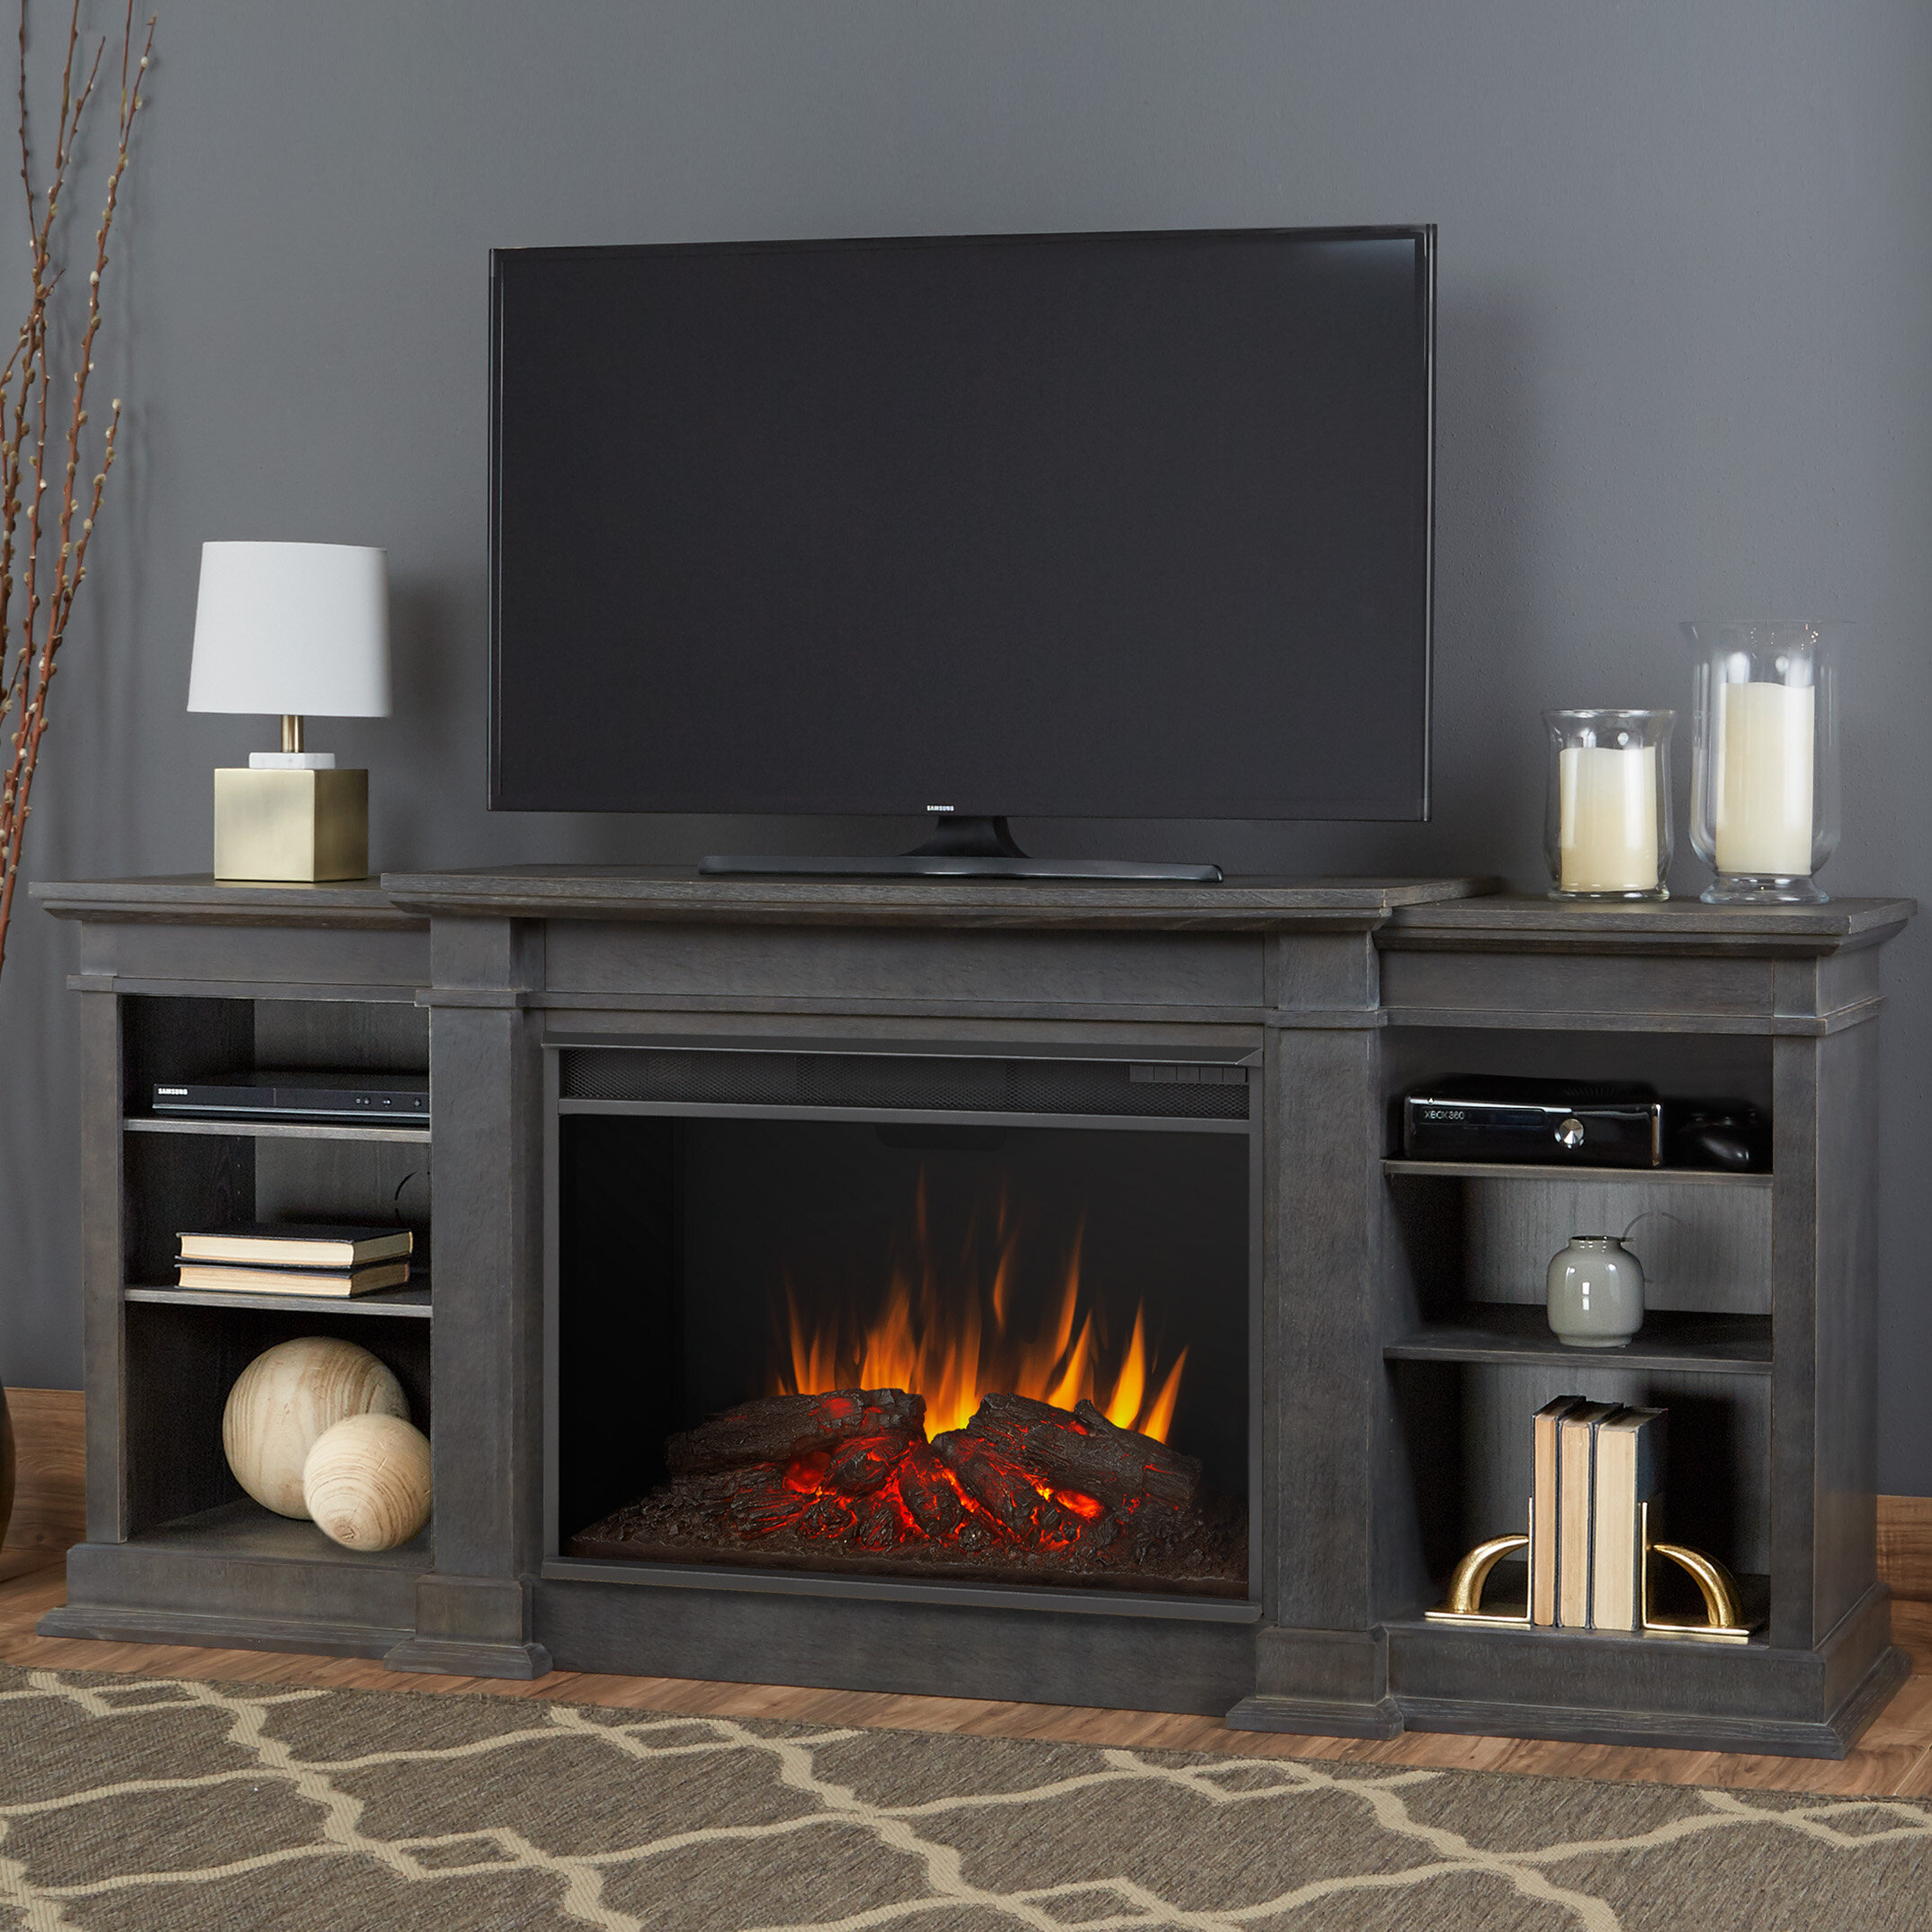 Fireplace Tv Stand Wayfair Beautiful Fireplace Entertainment Centers You Ll Love In 2019